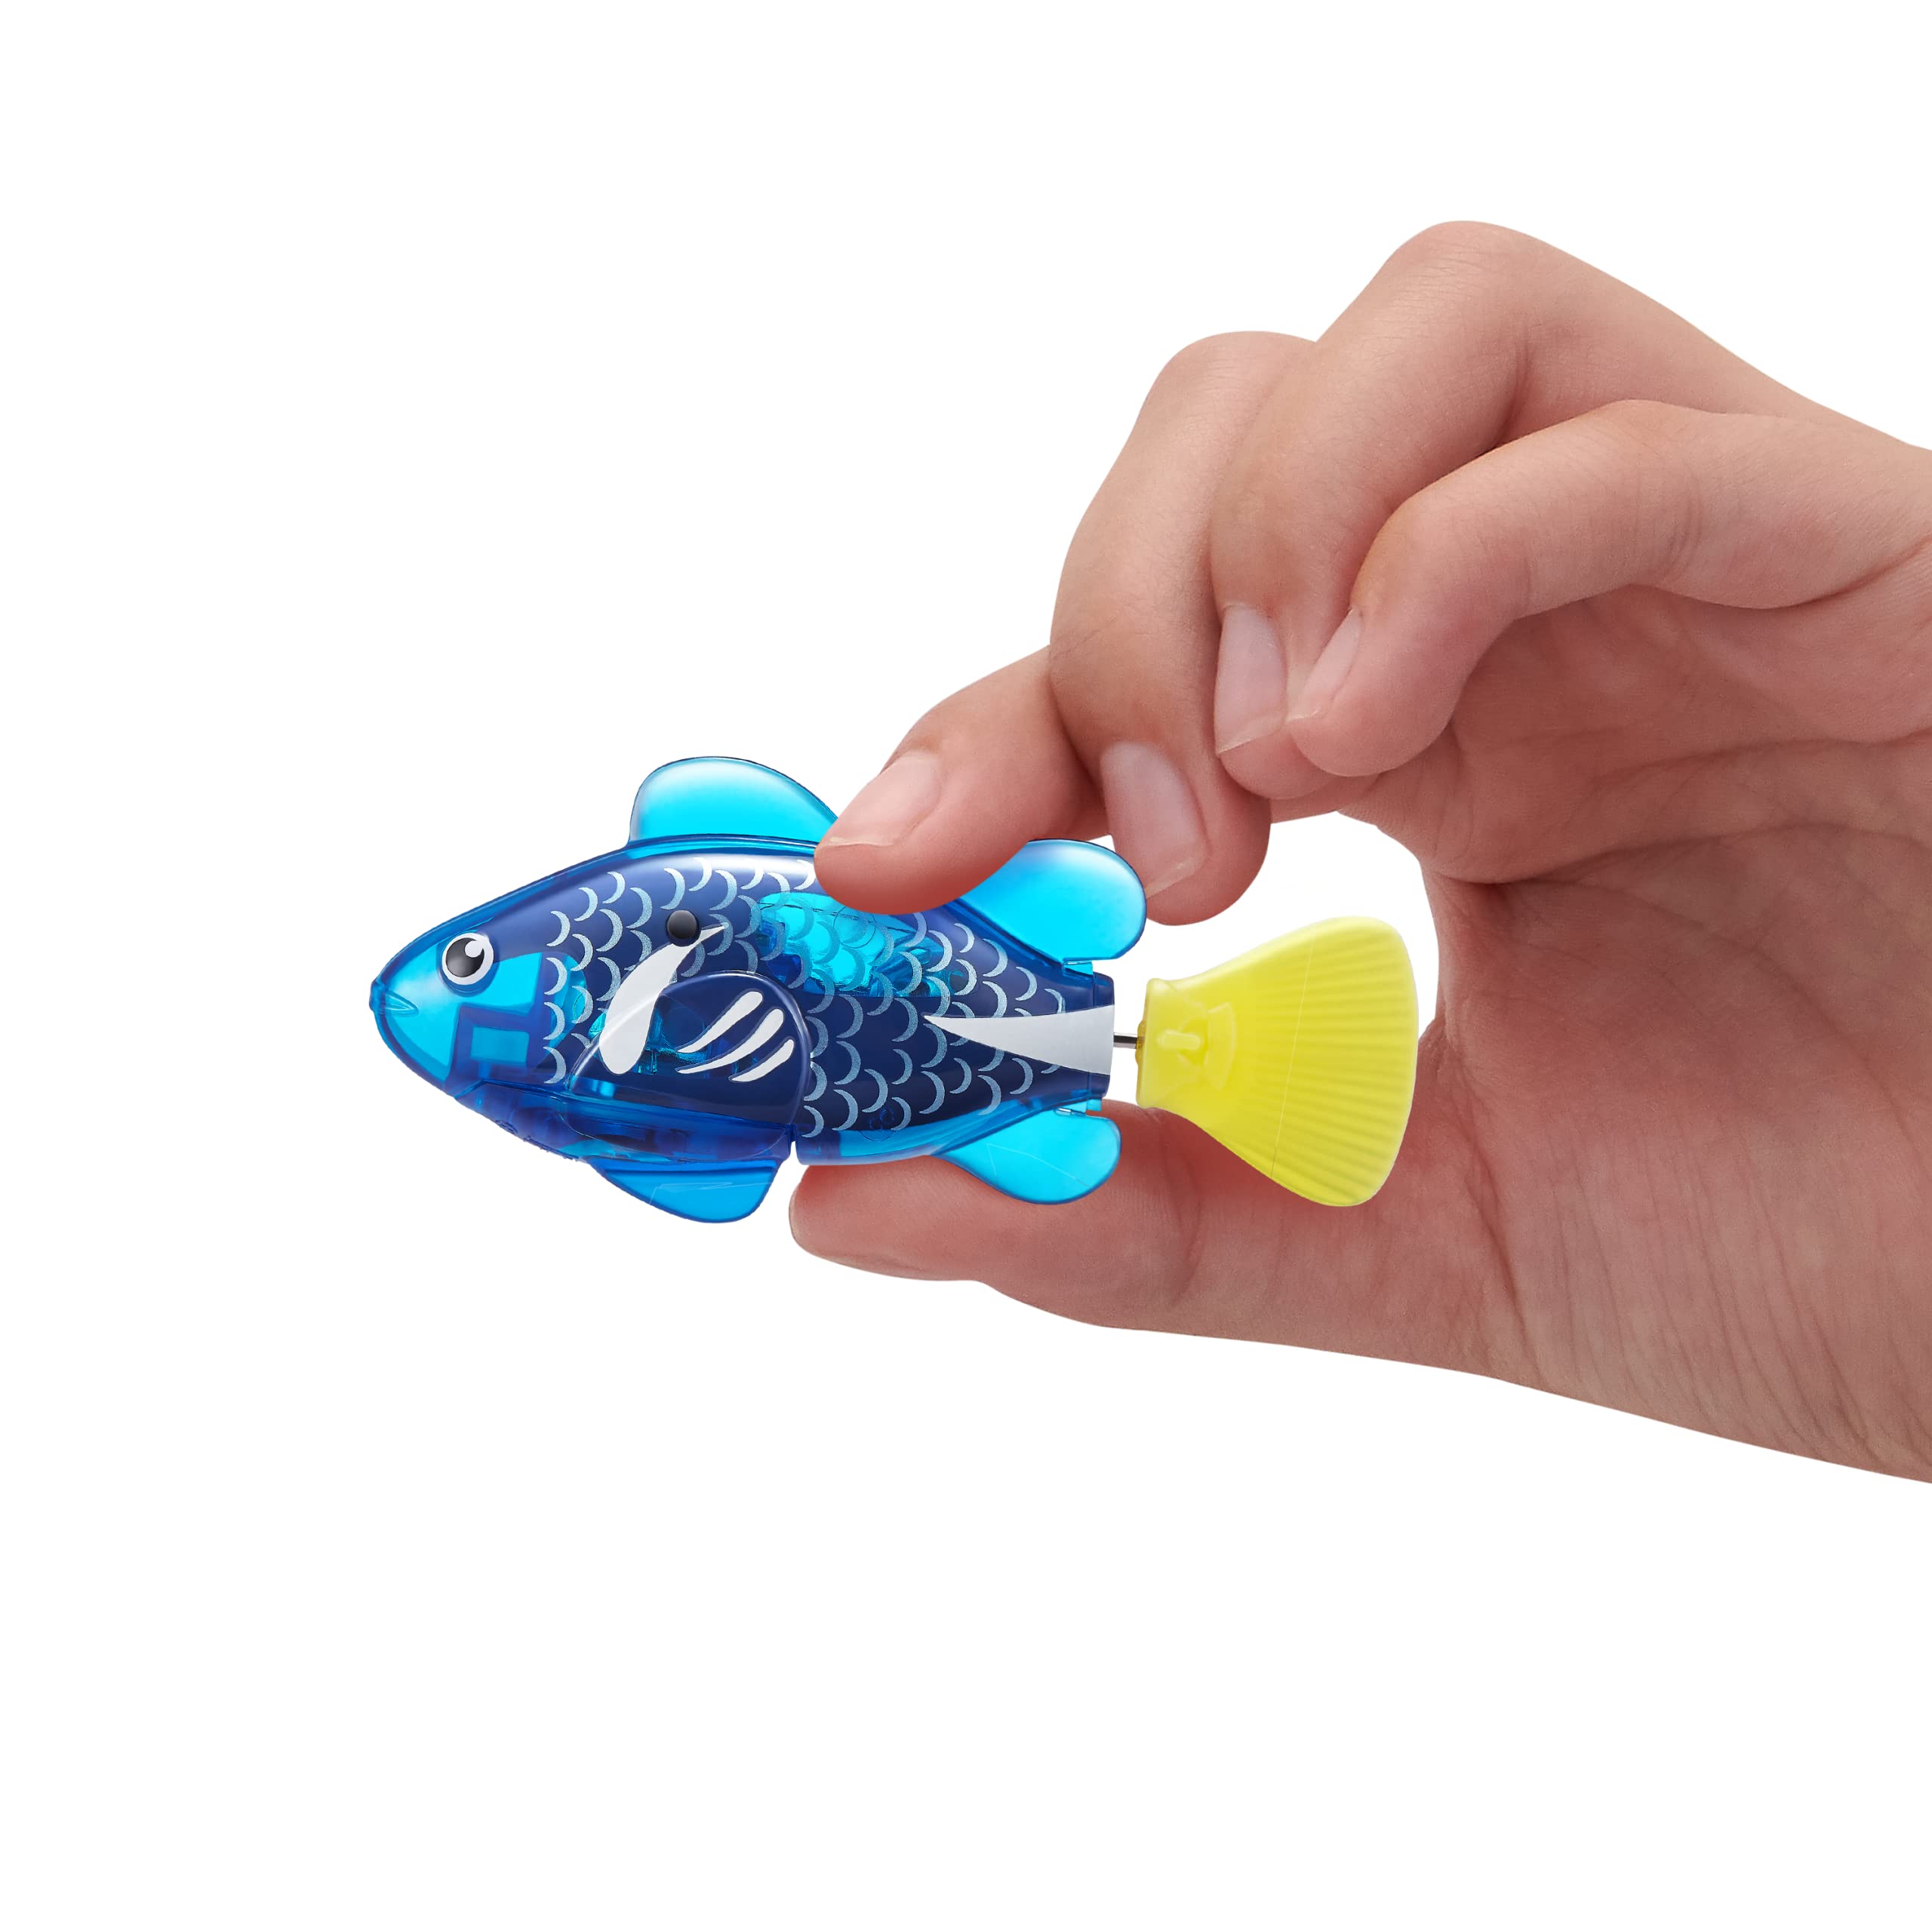 Robo Alive Robo Fish Robotic Swimming Fish (Blue + Red) by ZURU Water Activated, Changes Color, Comes with Batteries, Amazon Exclusive (2 Pack) Series 3